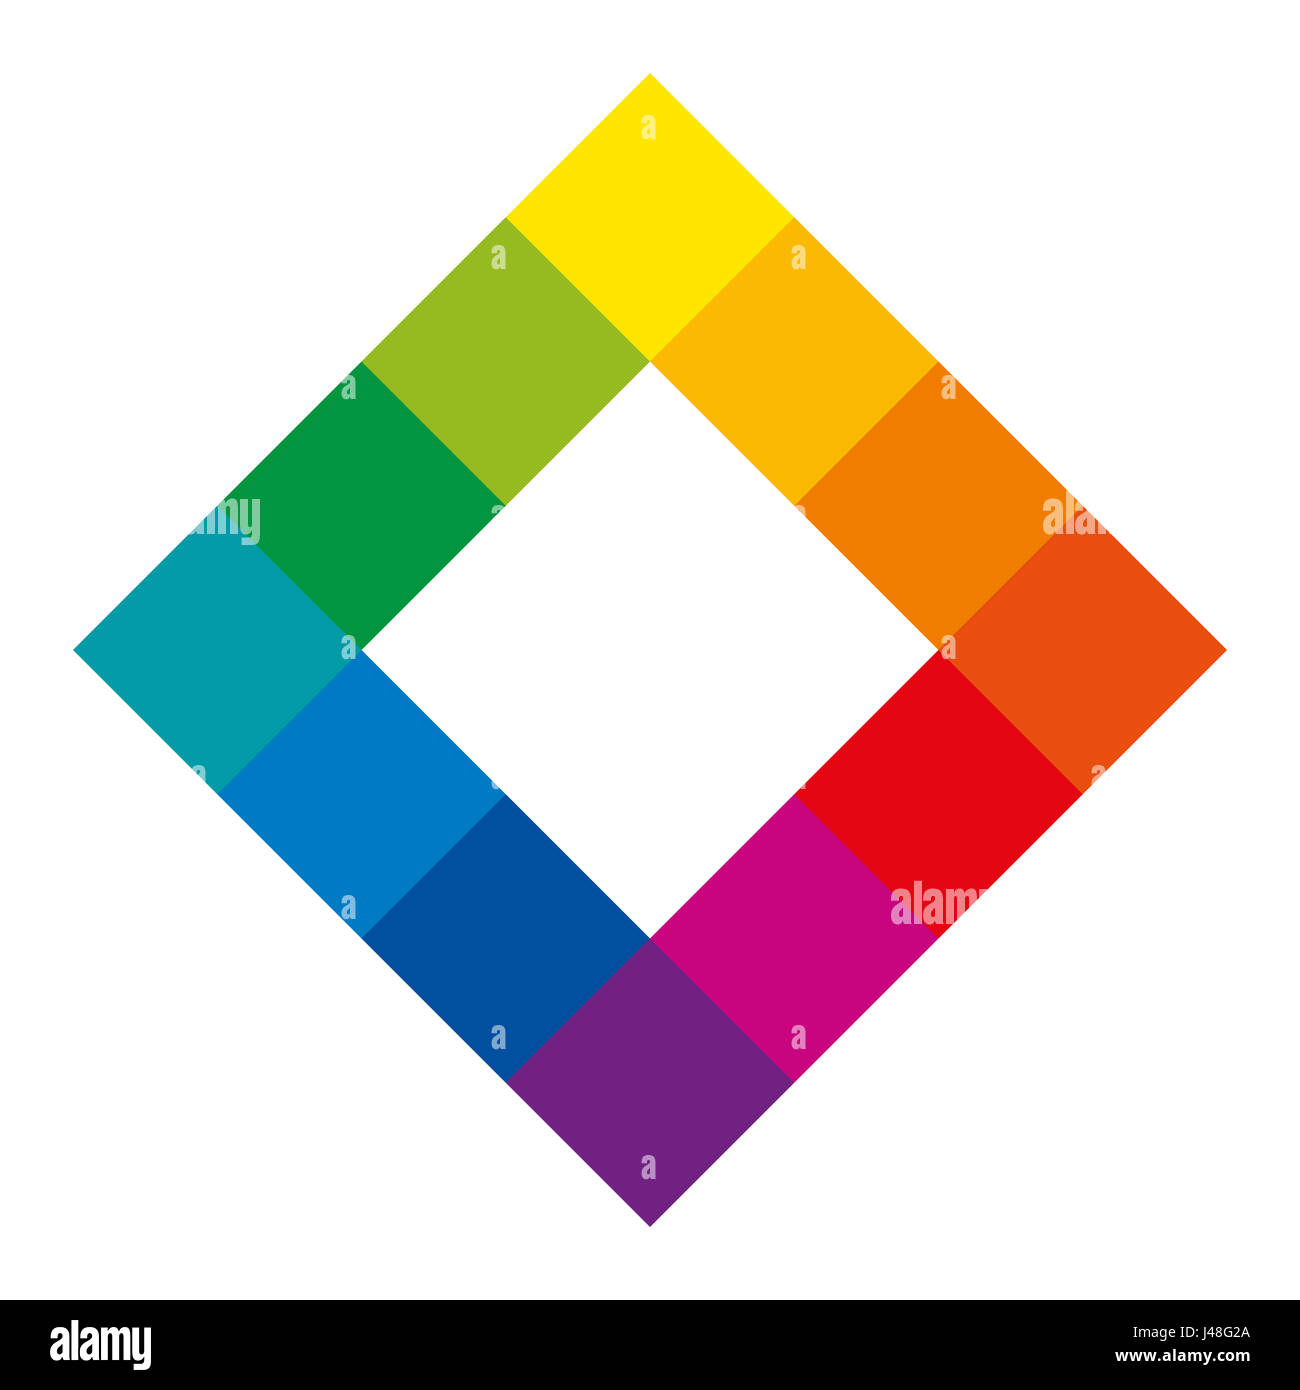 Twelve unique color hues of the color wheel in square shape showing the relationship between primary, secondary and tertiary colors. Stock Photo